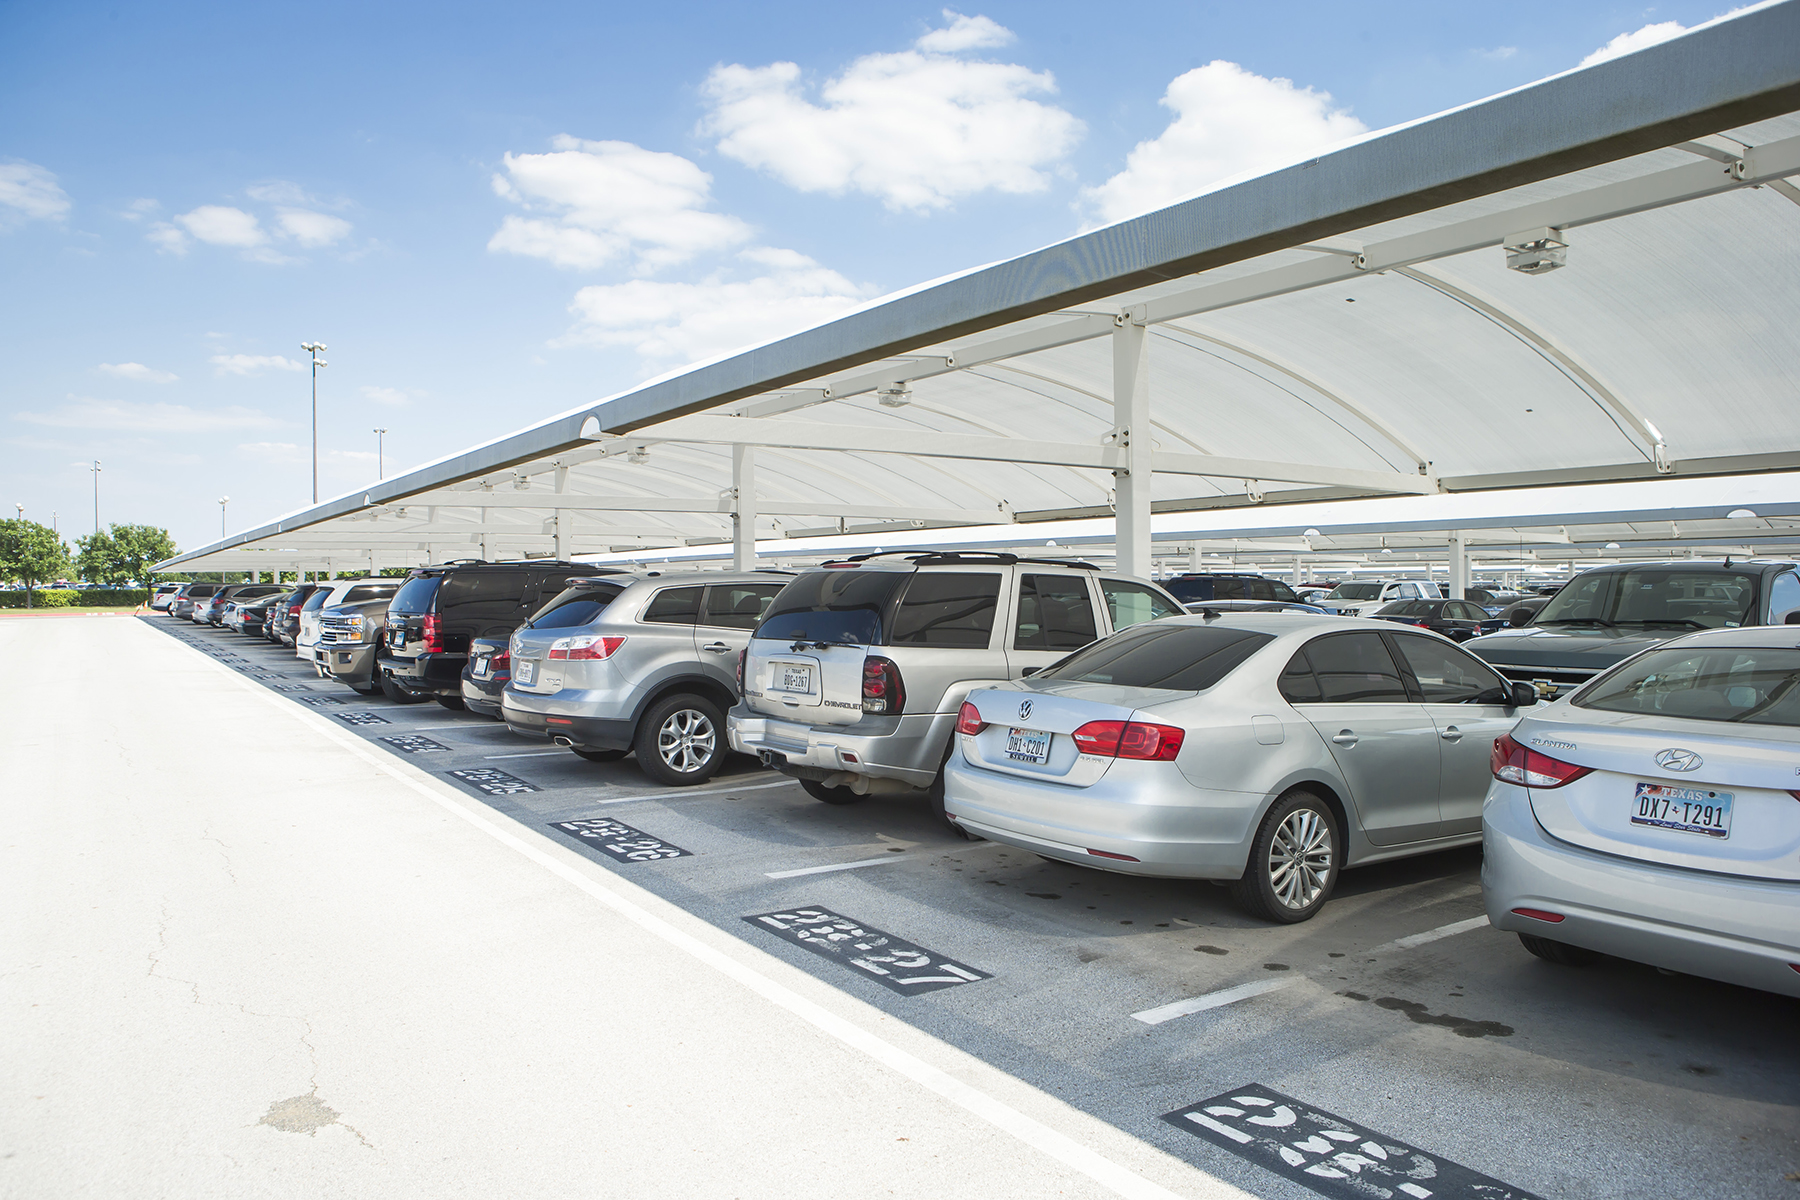 DFW Airport Parking Promo Codes - Save up to 50% - wide 10